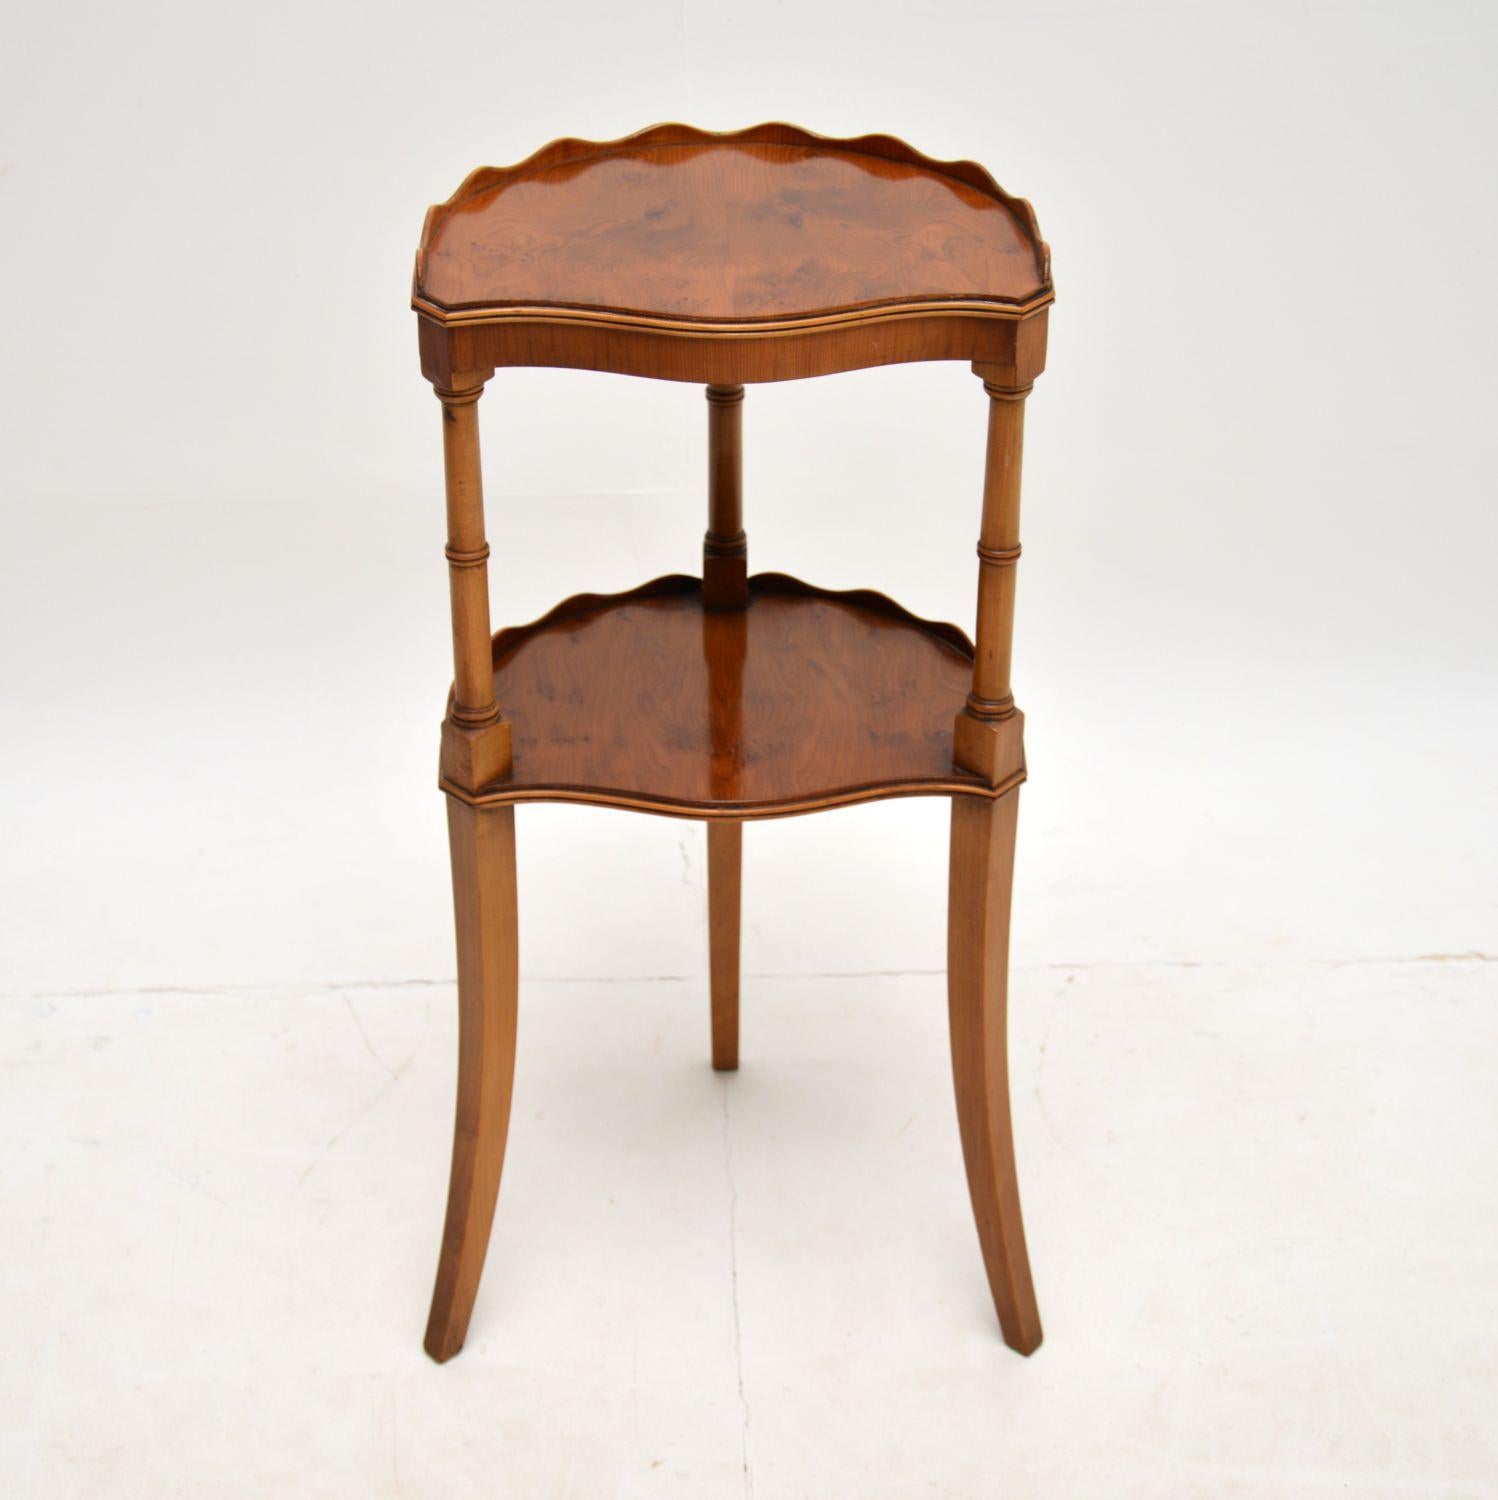 A charming yew wood two tier side table in the antique Sheraton style. This was made in England, it dates from around the 1950’s.

Beautifully made and with a very elegant design, this is a very useful size. it is nicely finished on all sides, so